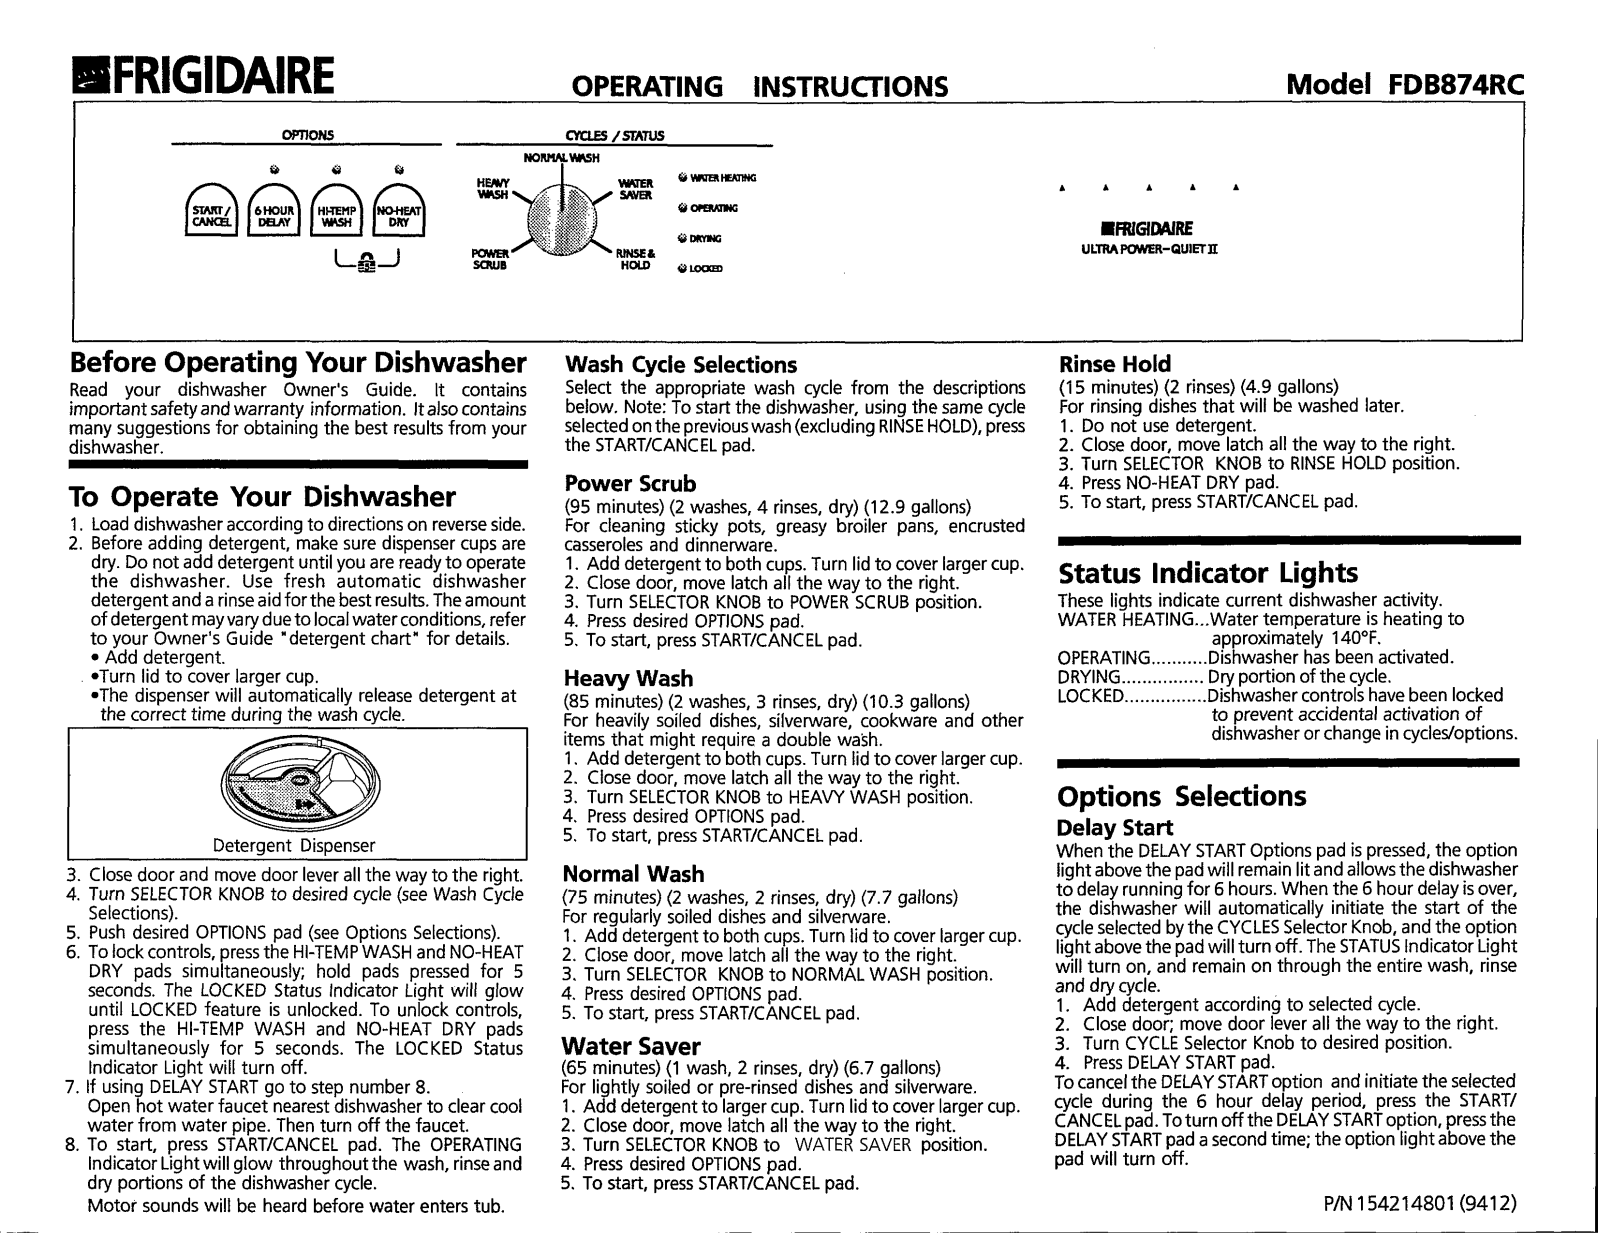 Frigidaire FDB874RC Owner's Guide